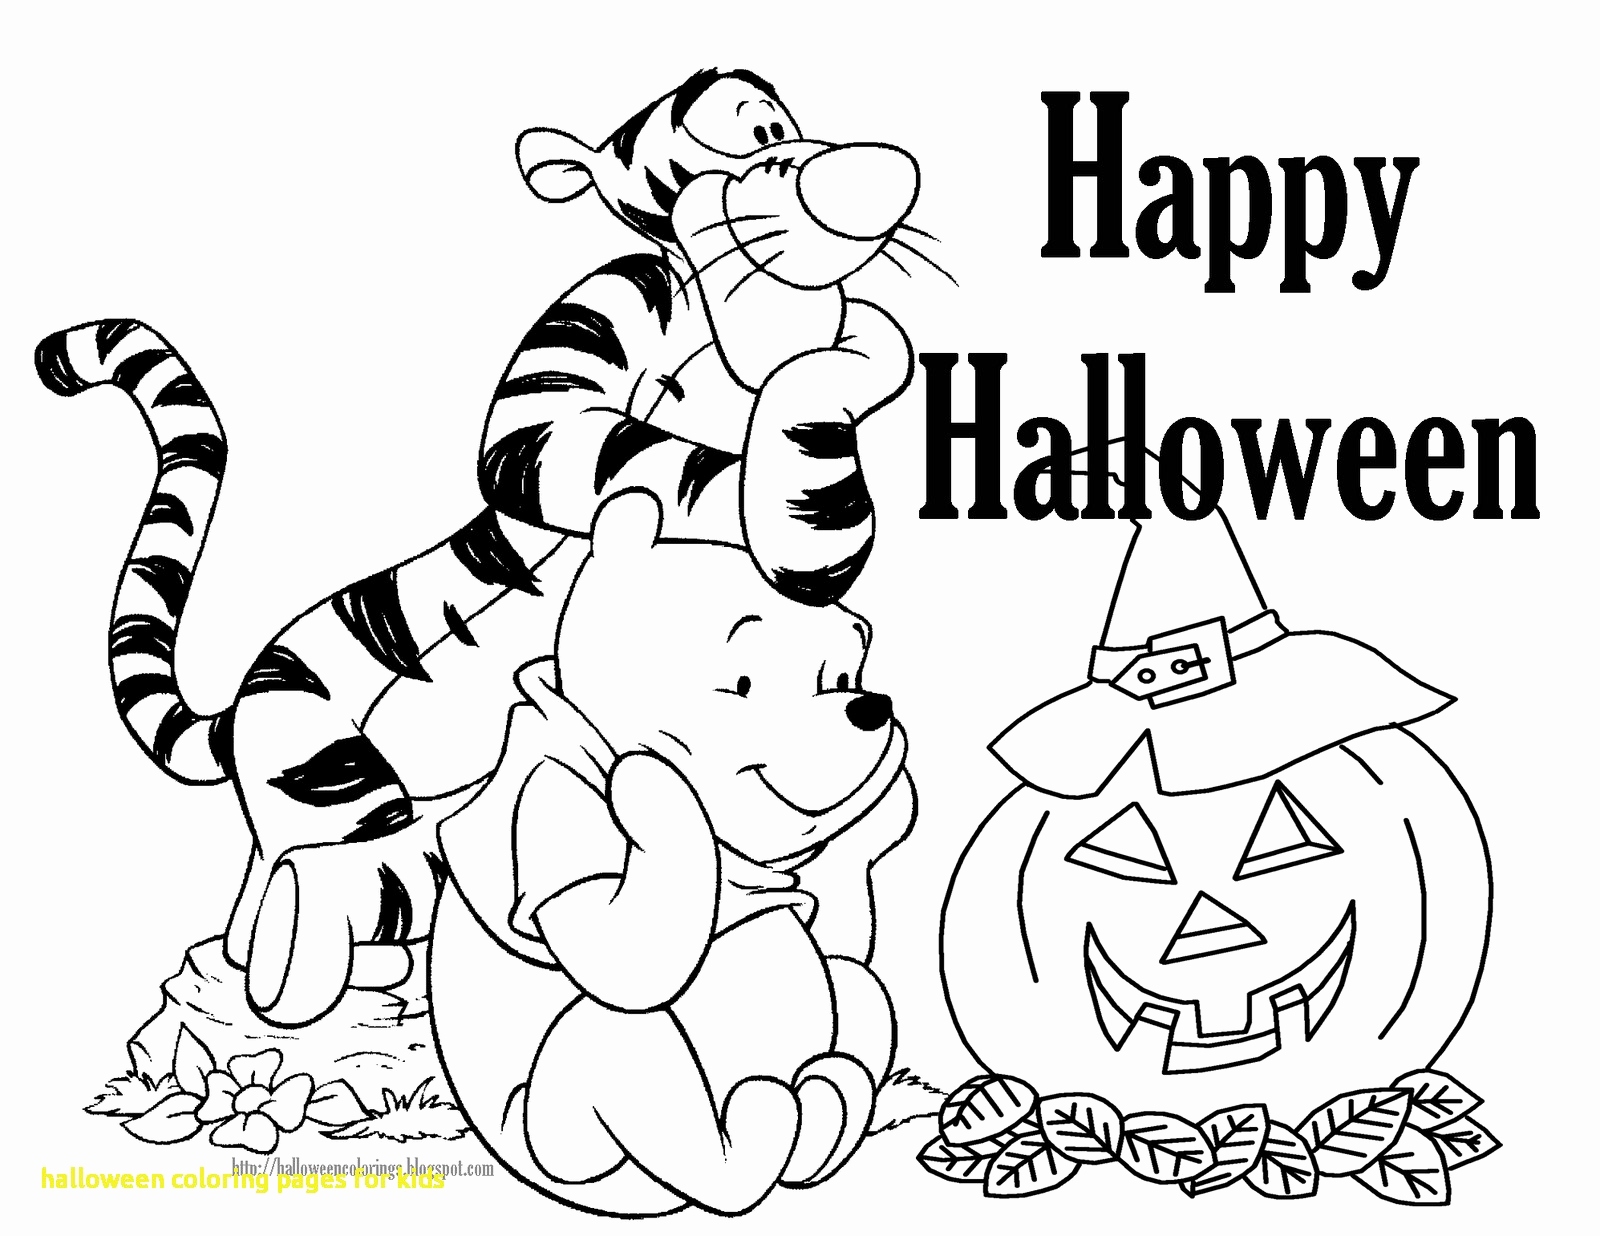 Fall Halloween Printable Coloring Pages 20 Images   Tarot Card ...